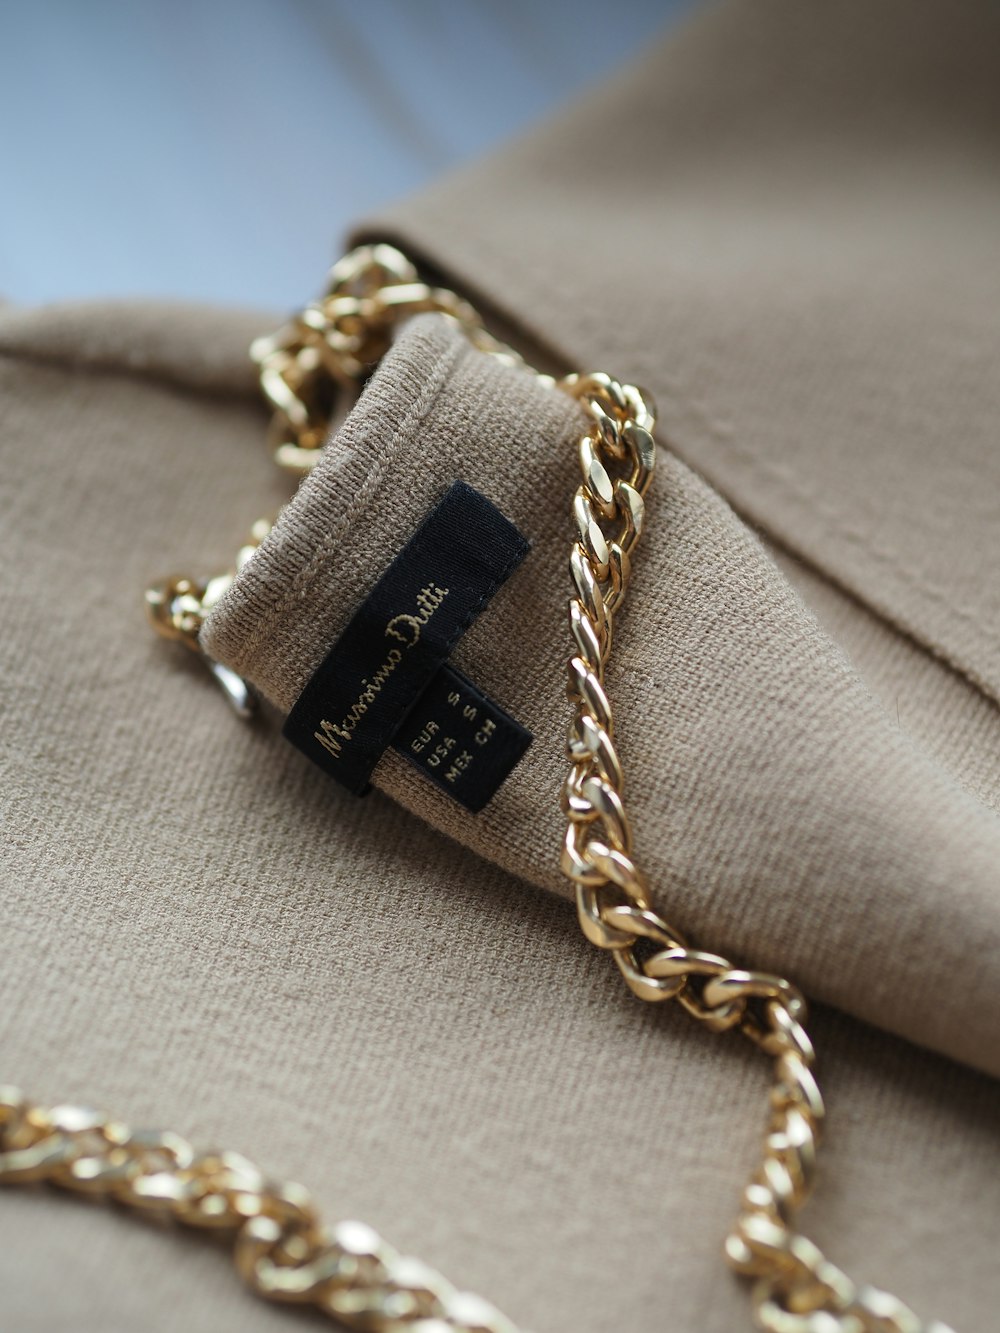 a close up of a gold chain on a jacket